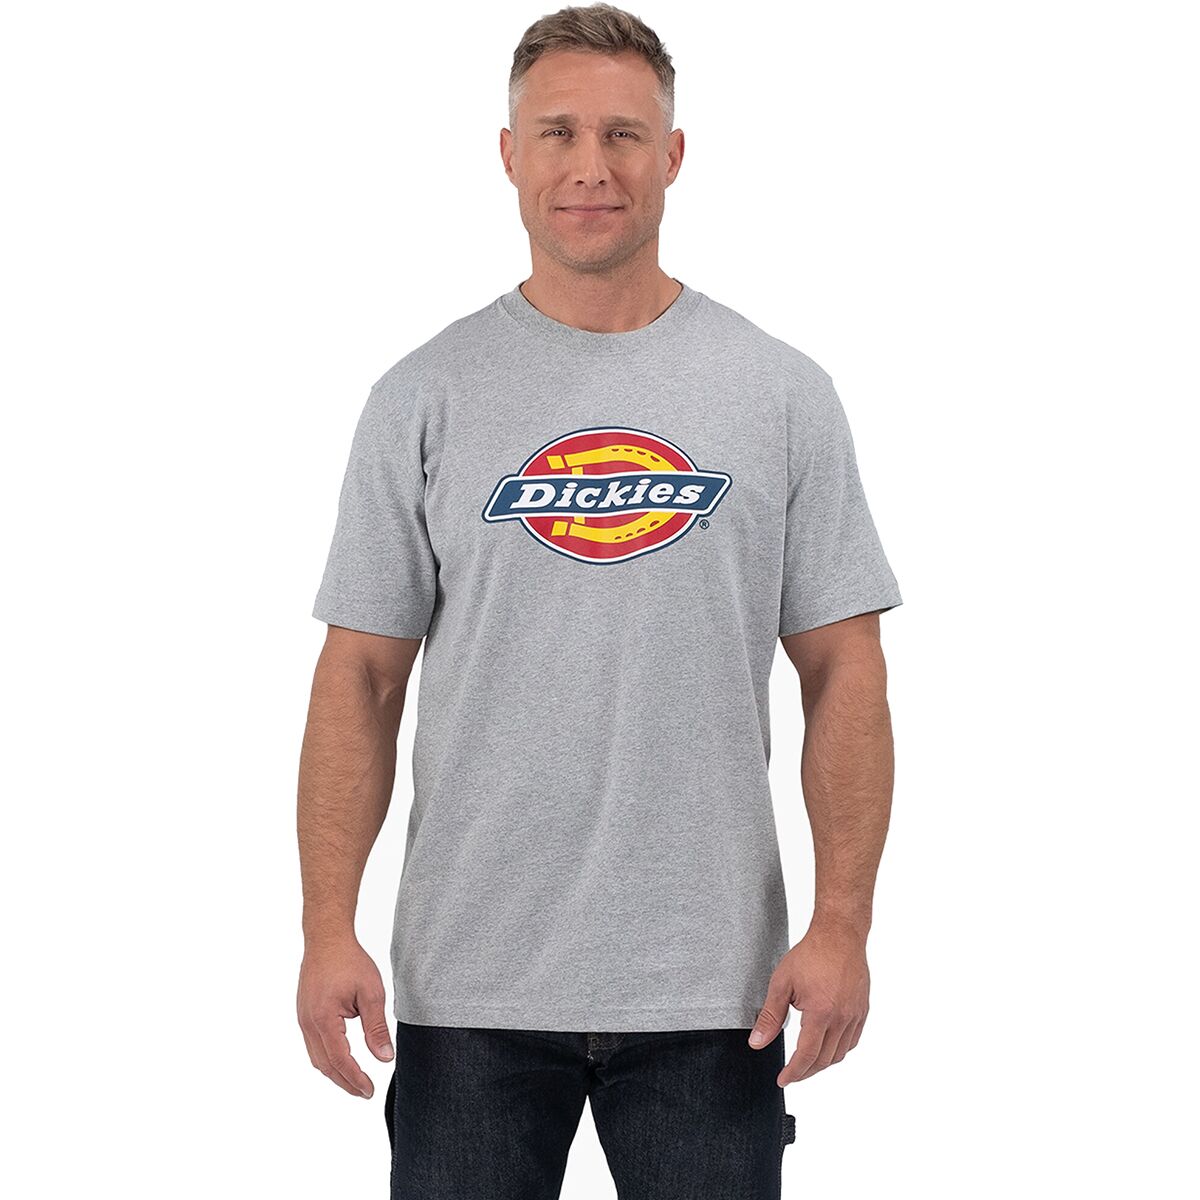 Dickies Heavyweight Tricolor T-Shirt - Men's - Clothing